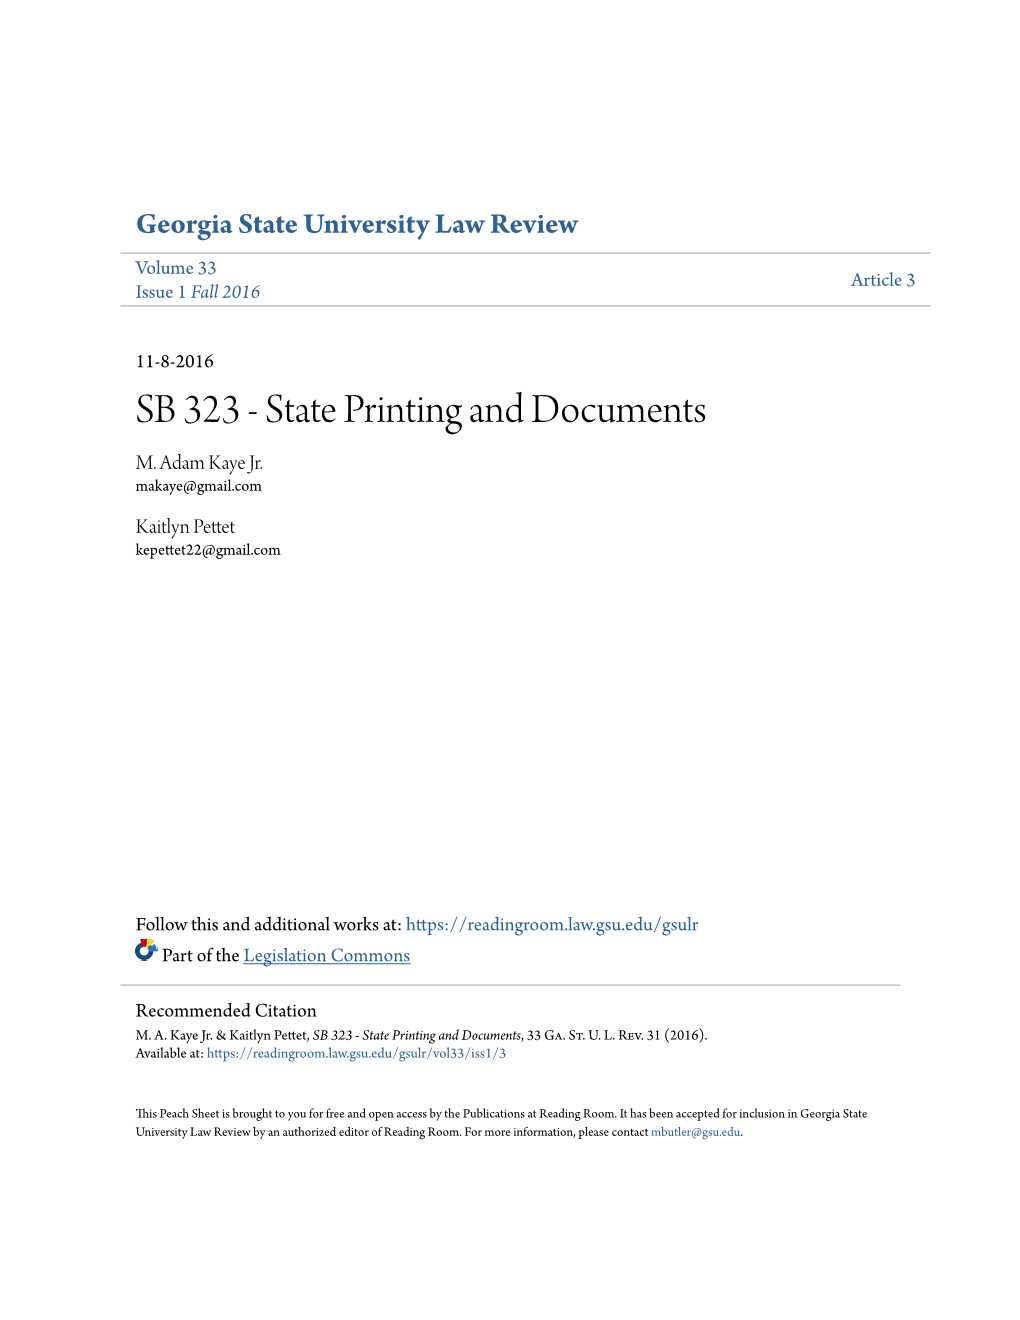 SB 323 - State Printing and Documents M